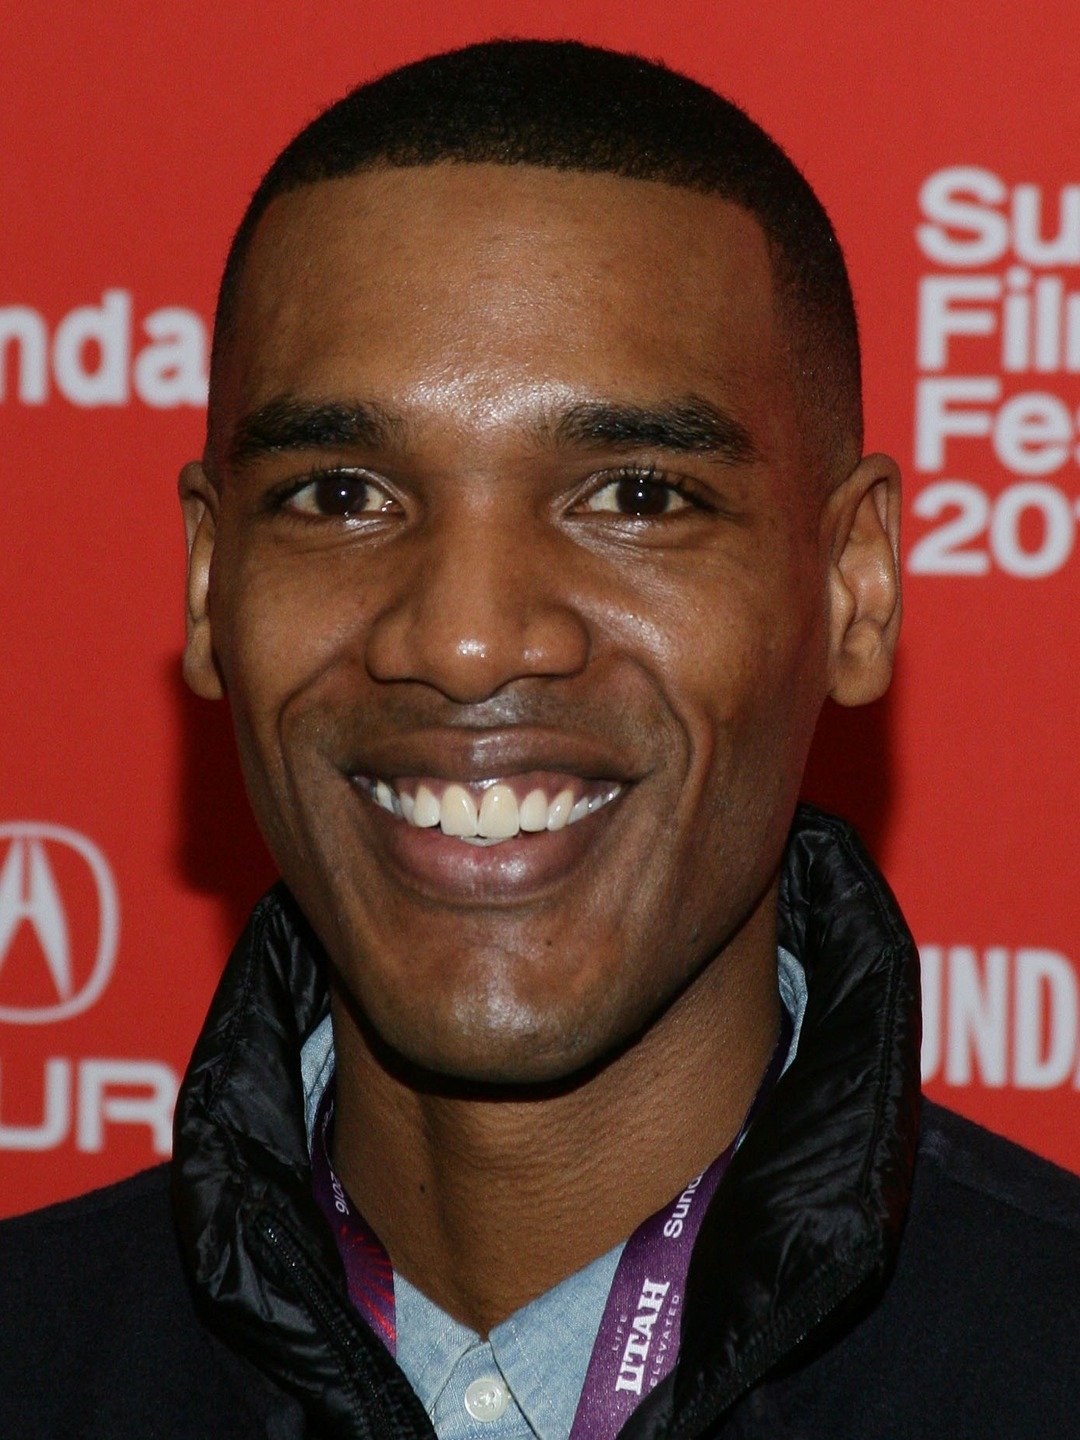 How tall is Parker Sawyers?